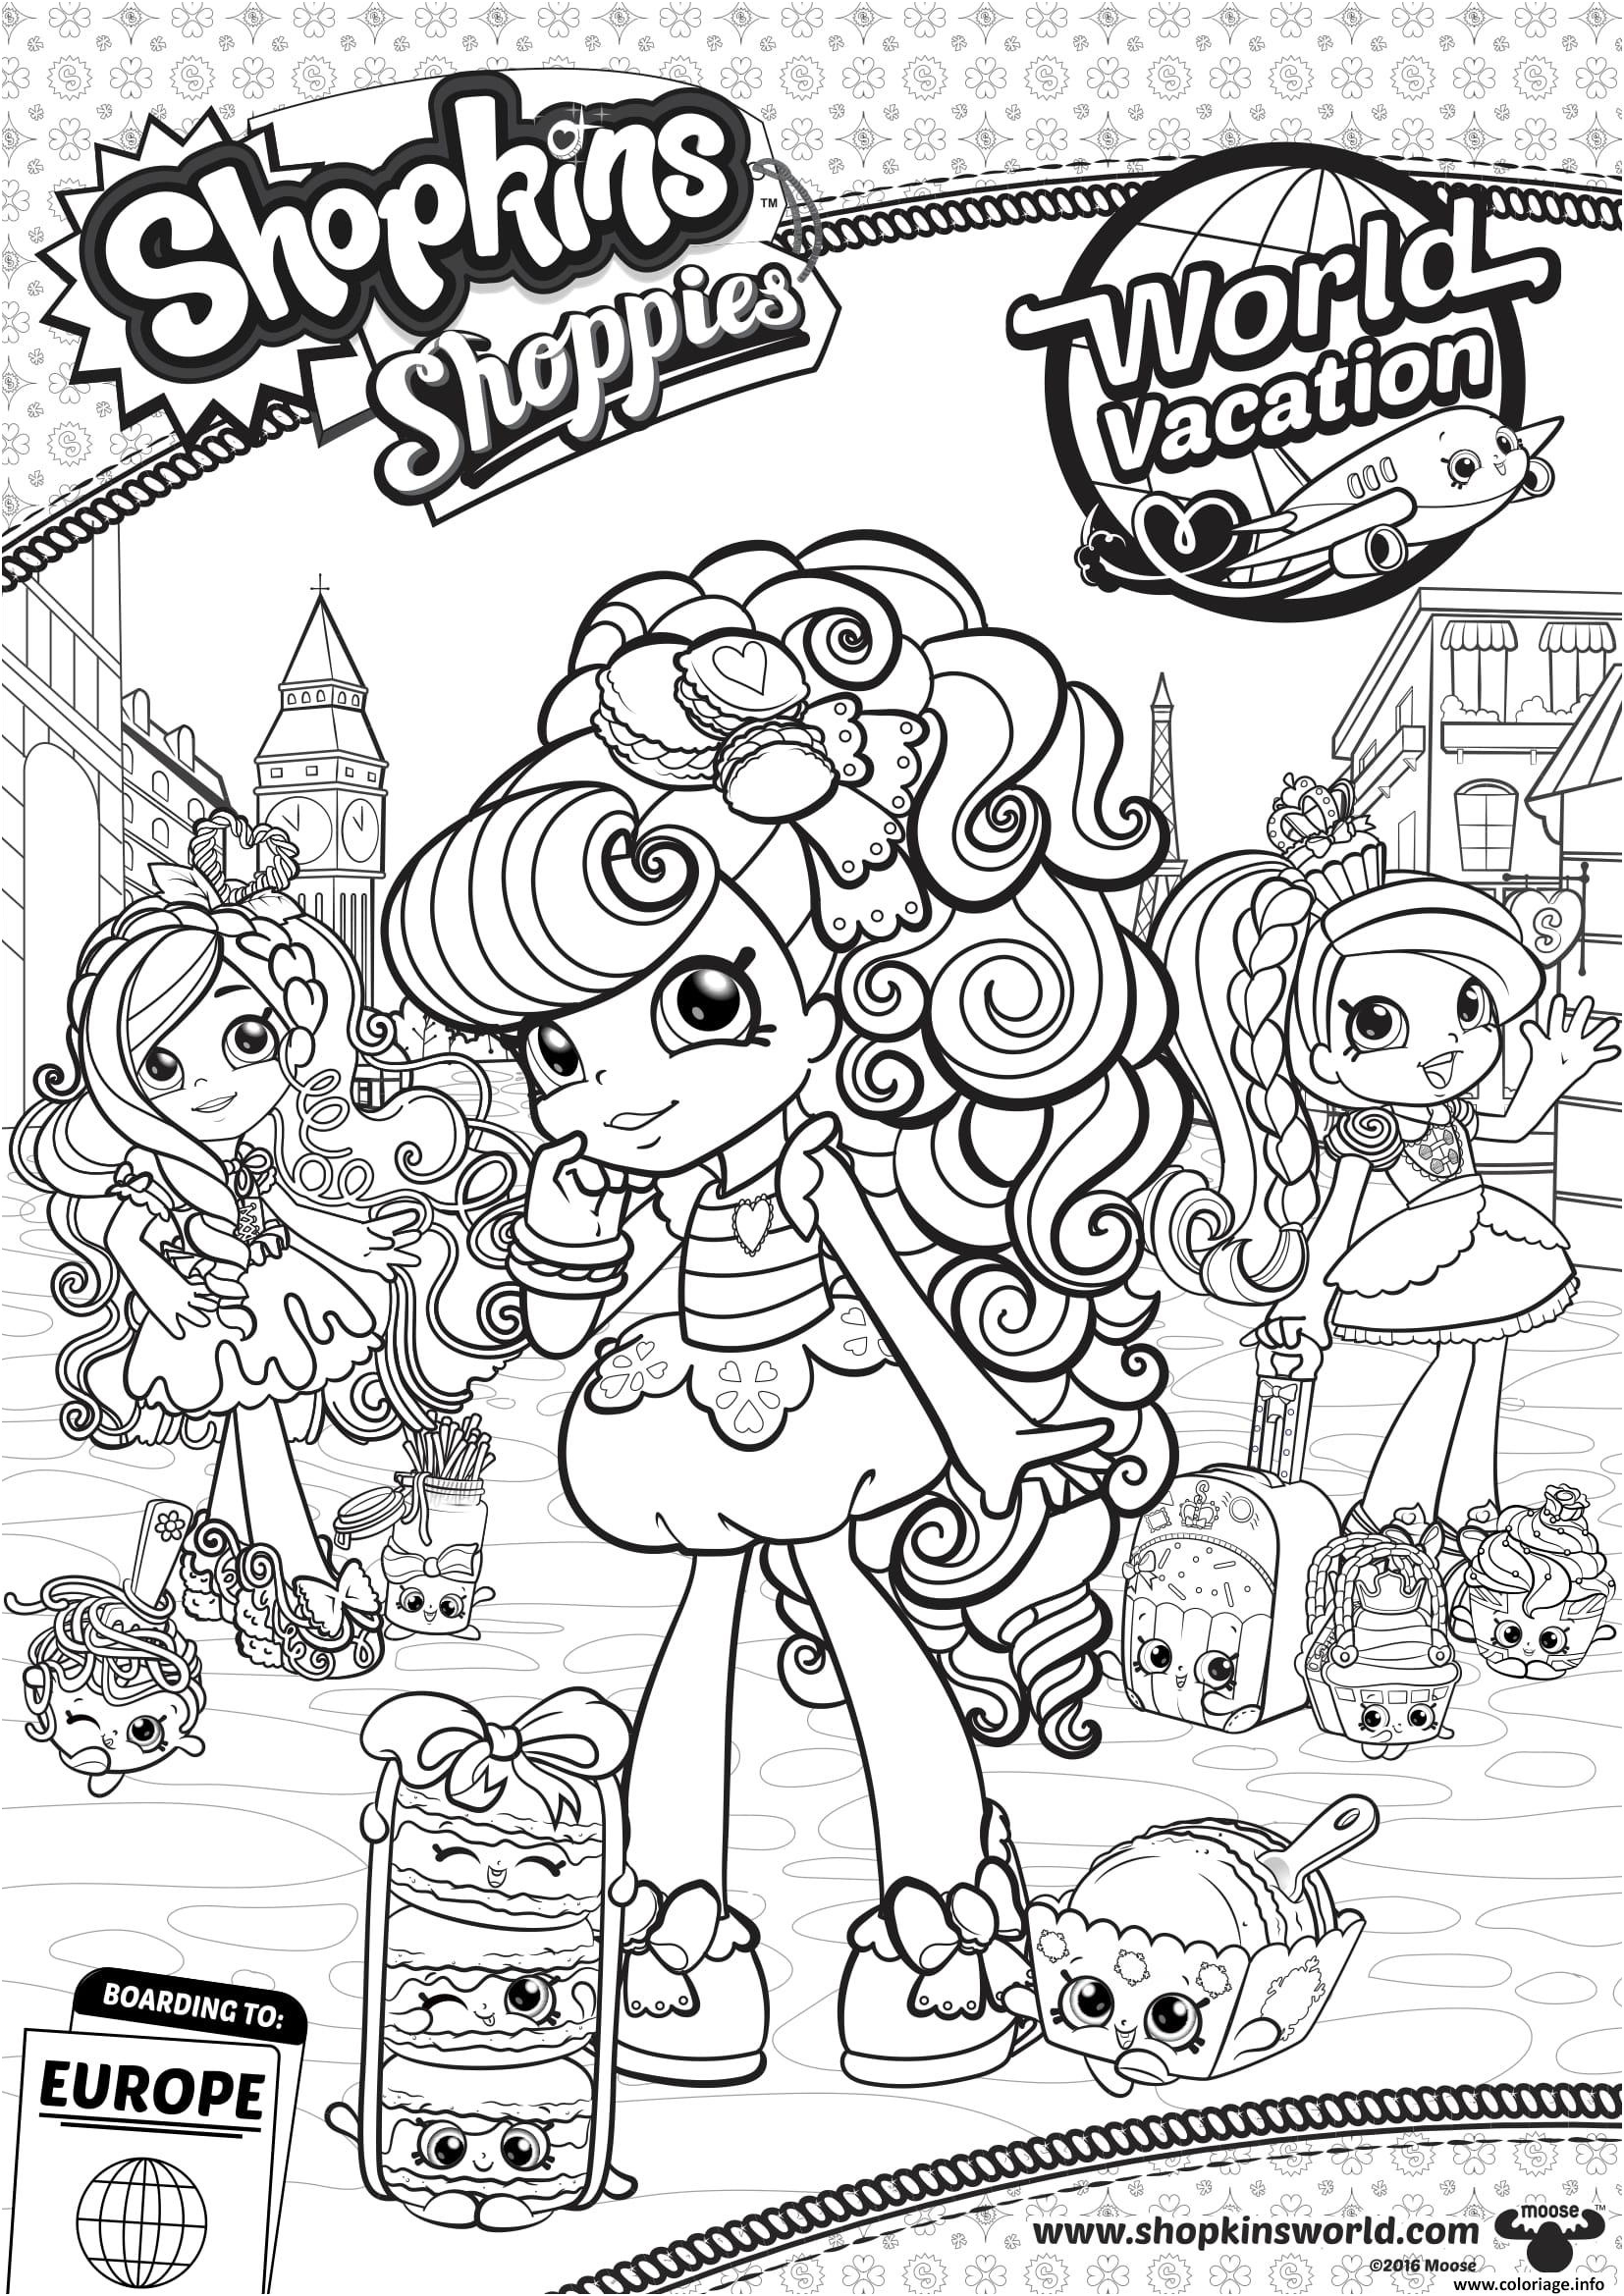 shopkins shoppies world vacation europe 4 coloriage dessin